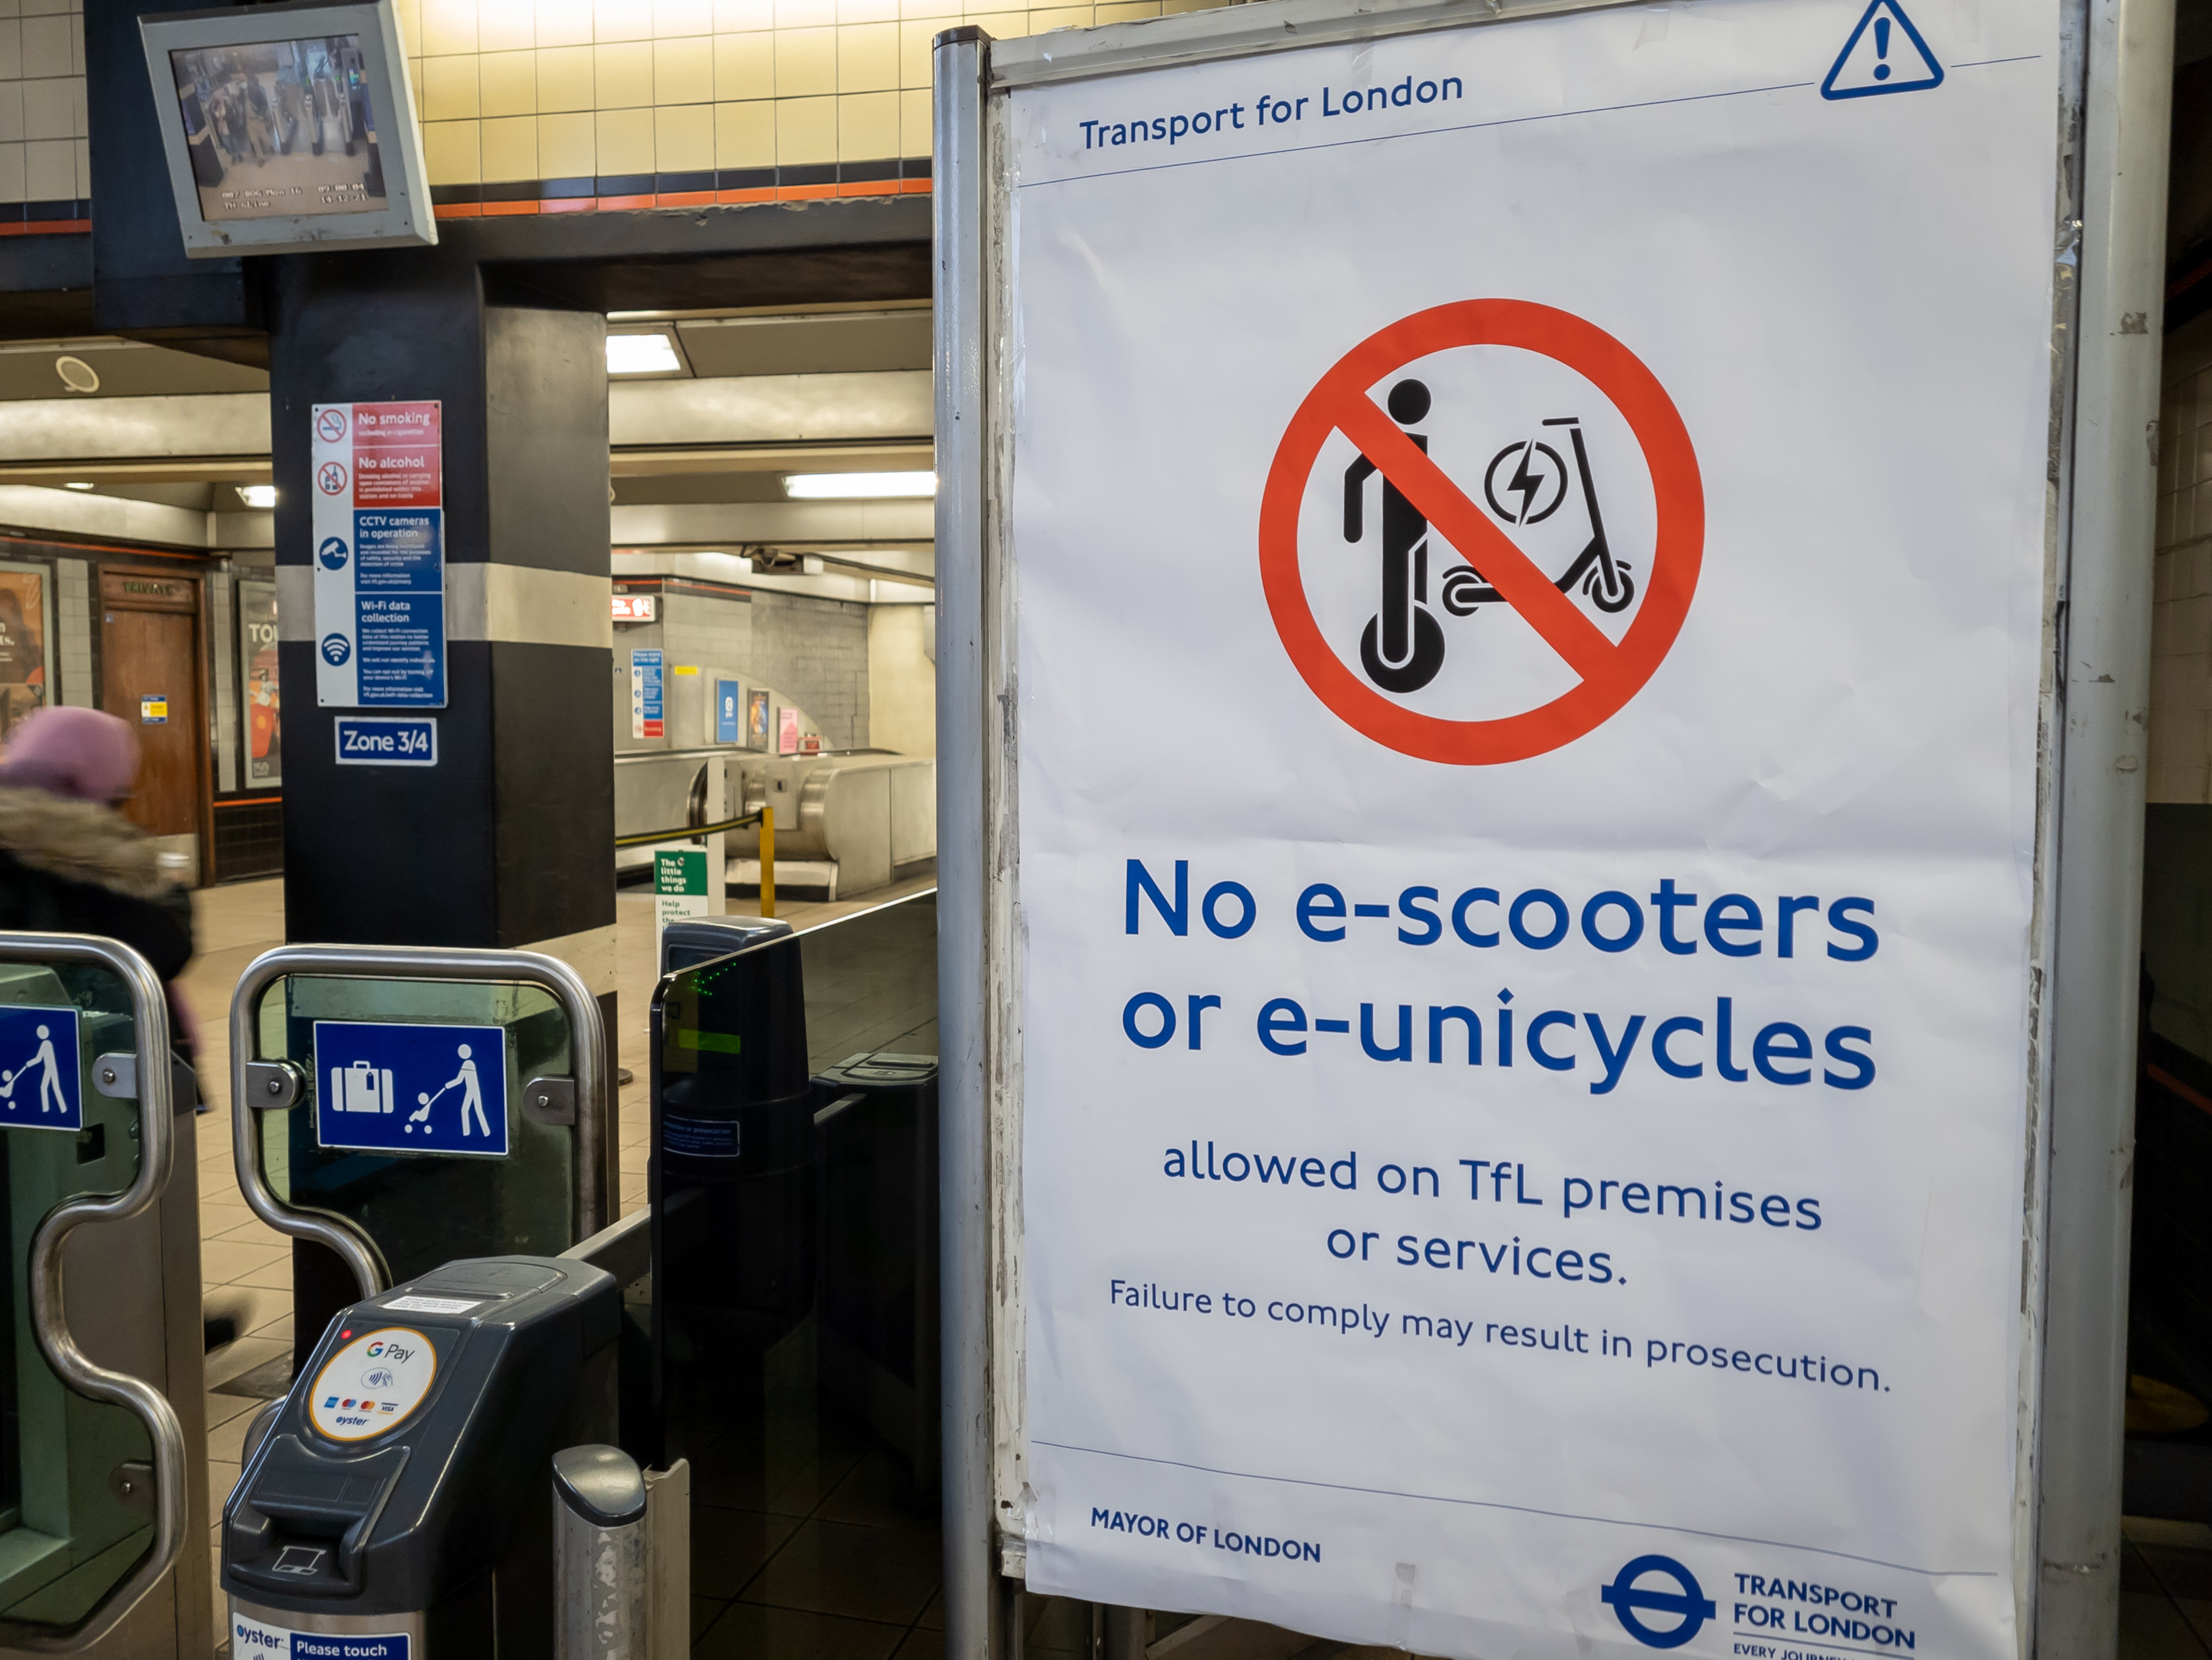 Will the UK Change Laws on E-scooters in the Few Months - Or Will We Have Wait? » Electric Guide